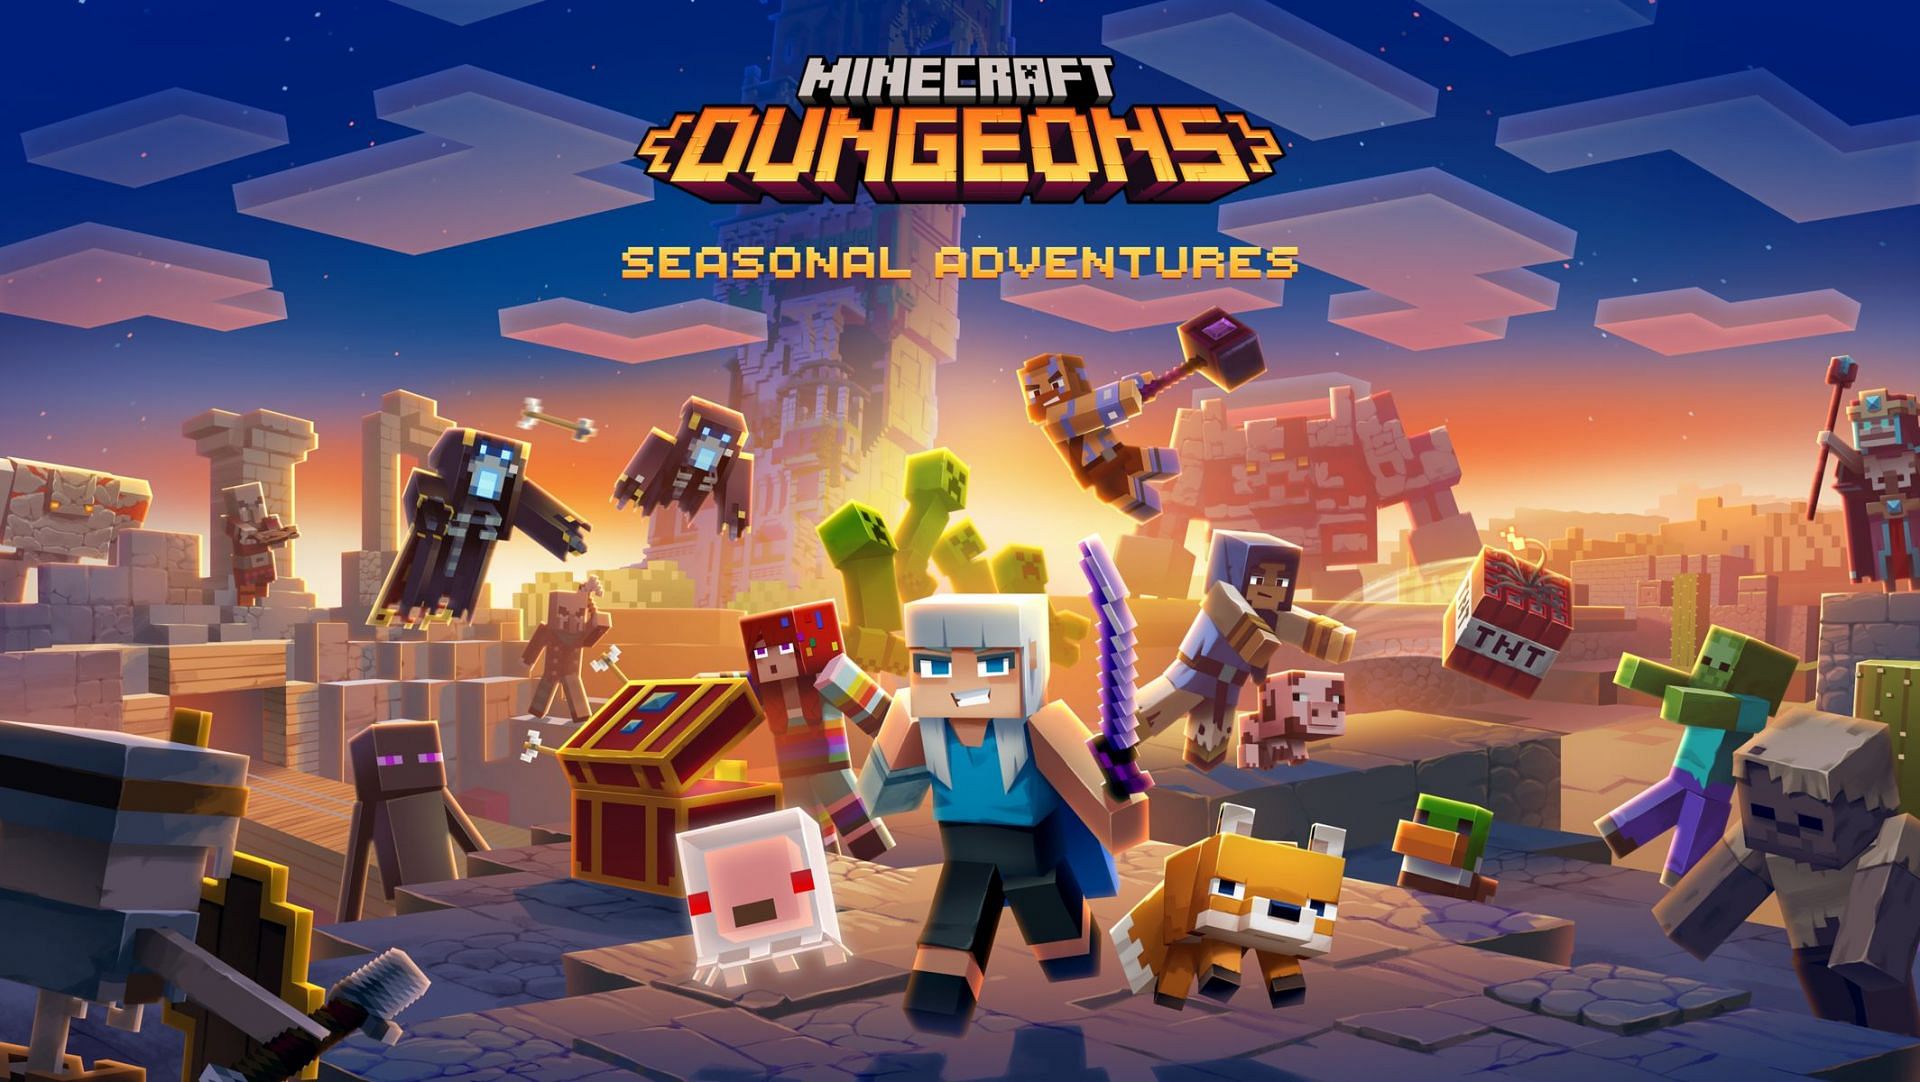 Cloudy Climb will be the first of many Seasonal Adventures in Minecraft Dungeons (Image via Mojang)